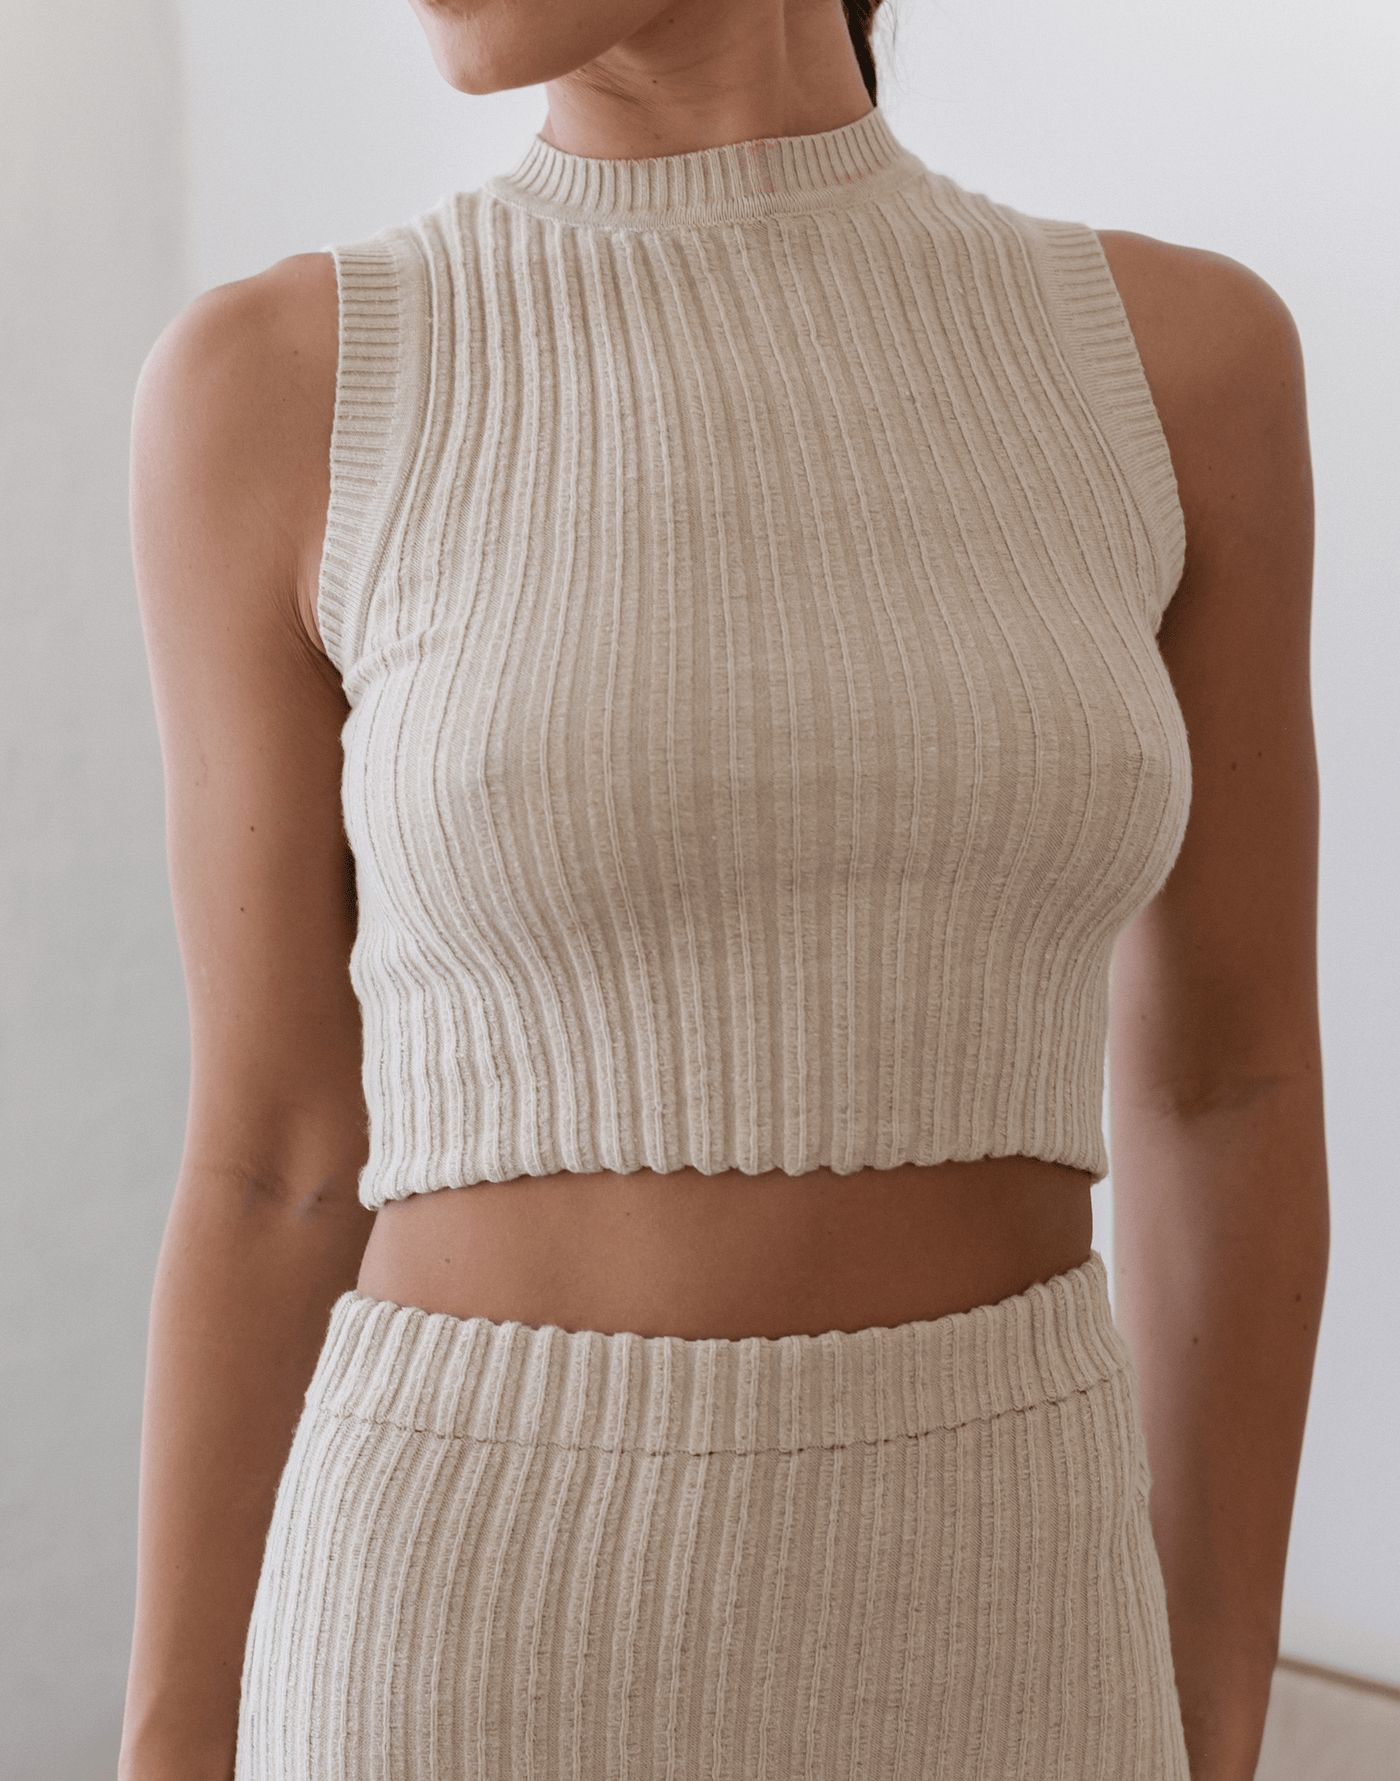 Untouchable Knit Top (Mocha) - High Neck Knit Top - Women's Top - Charcoal Clothing